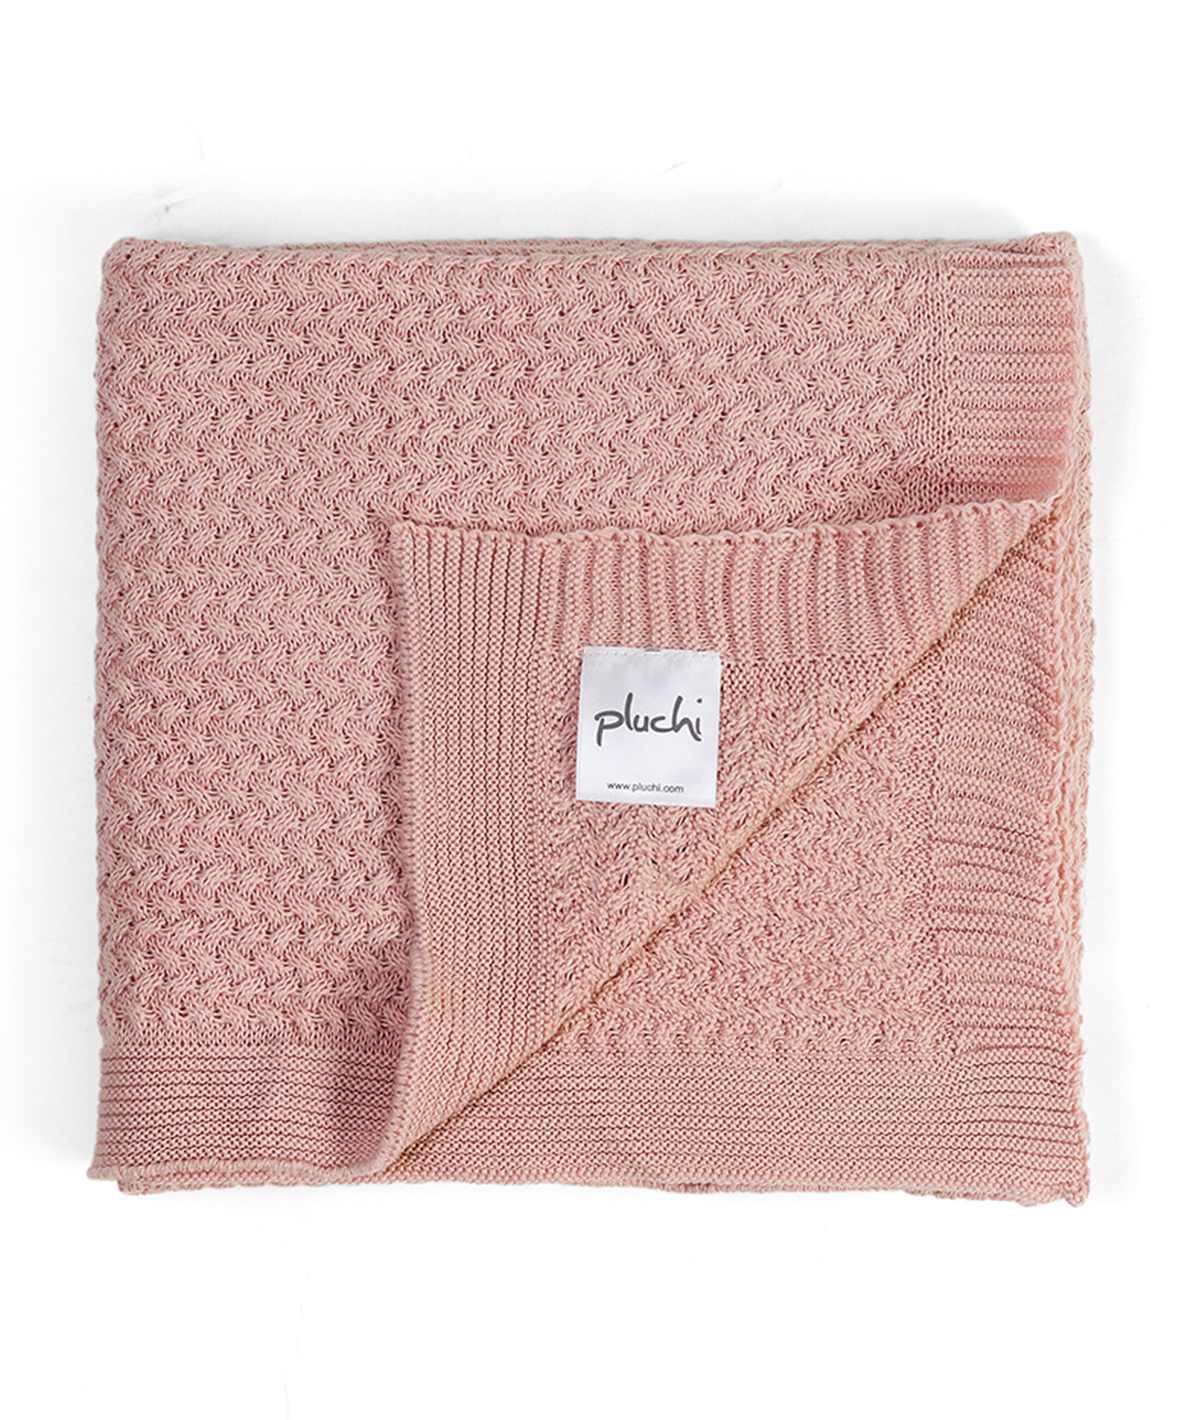 Giggle Knit Pink Color Cotton Knitted Ac Blanket For Baby / Infant / New Born For Use In All Seasons